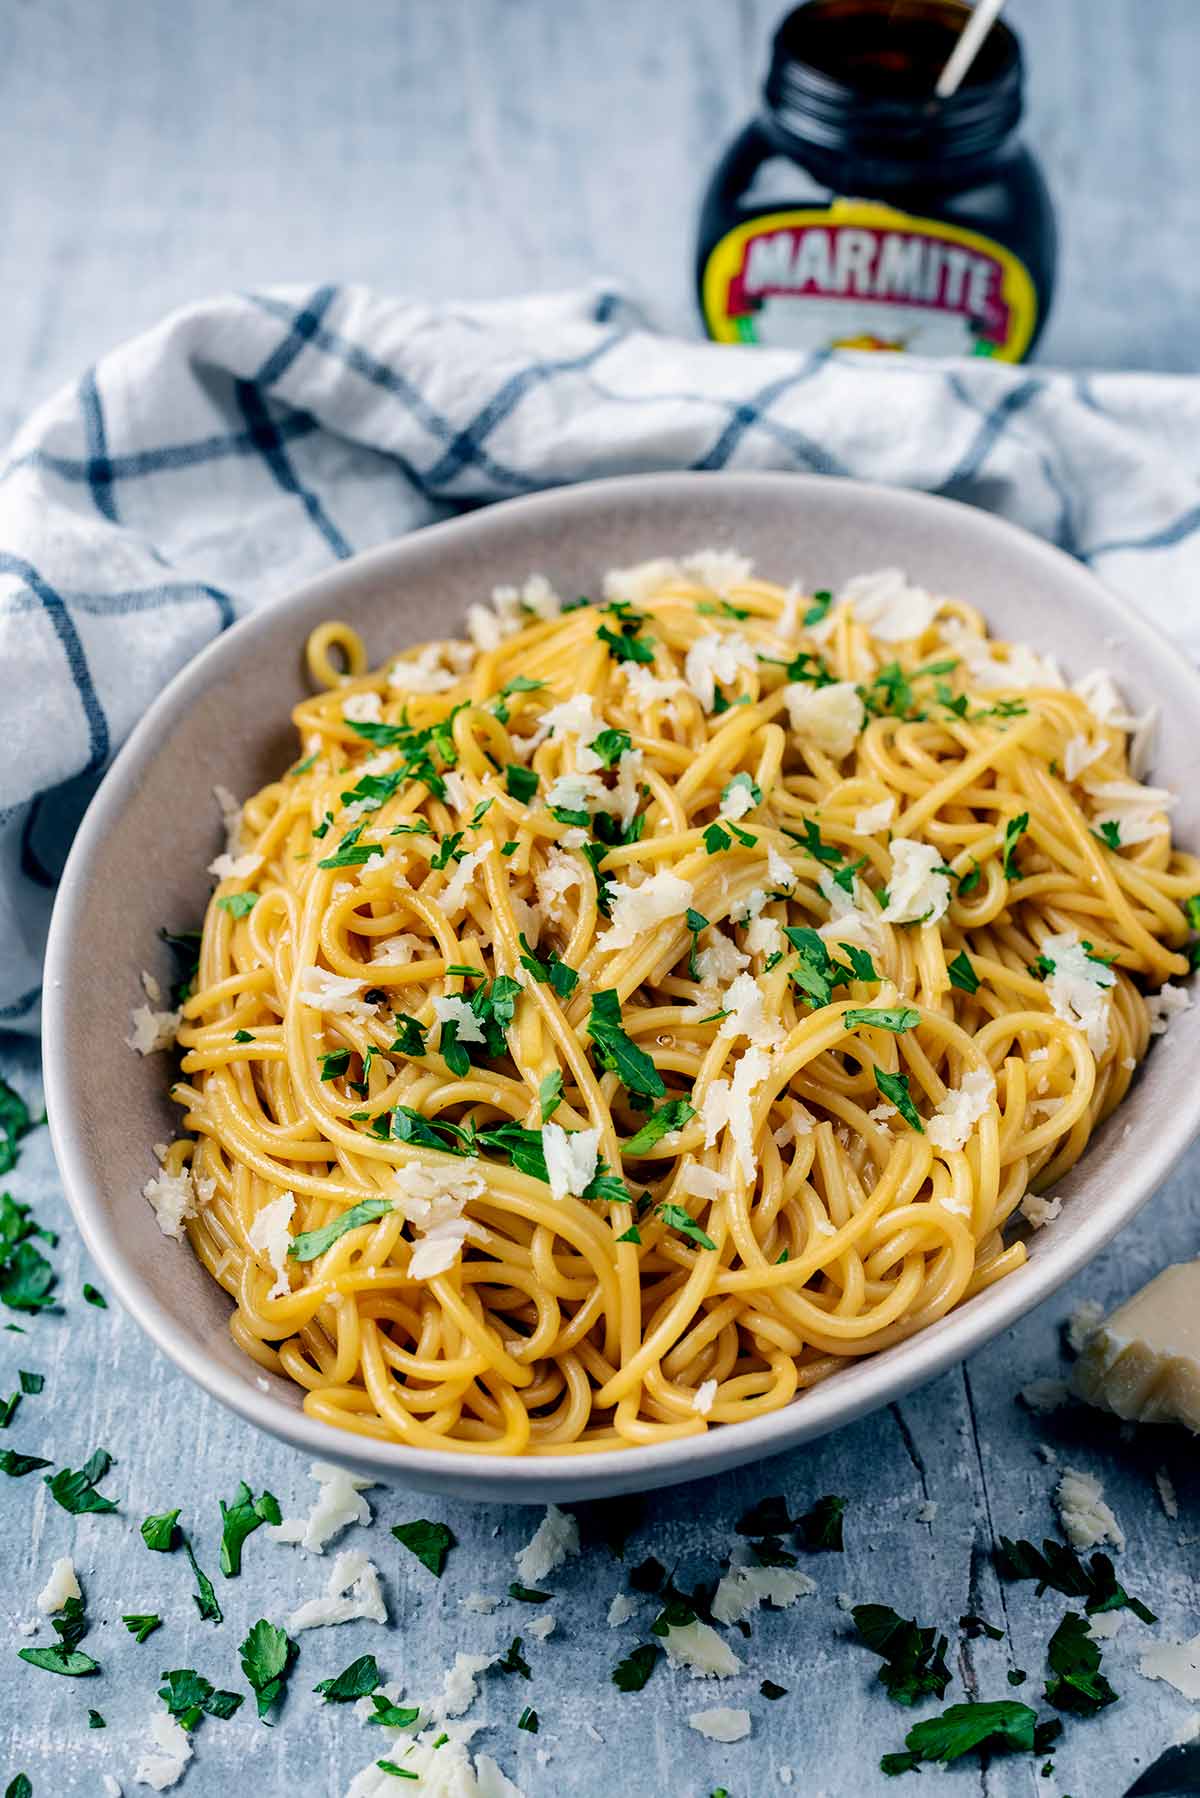 A bowl of spaghetti, cheese and parsley with a jar of Marmite in the background.